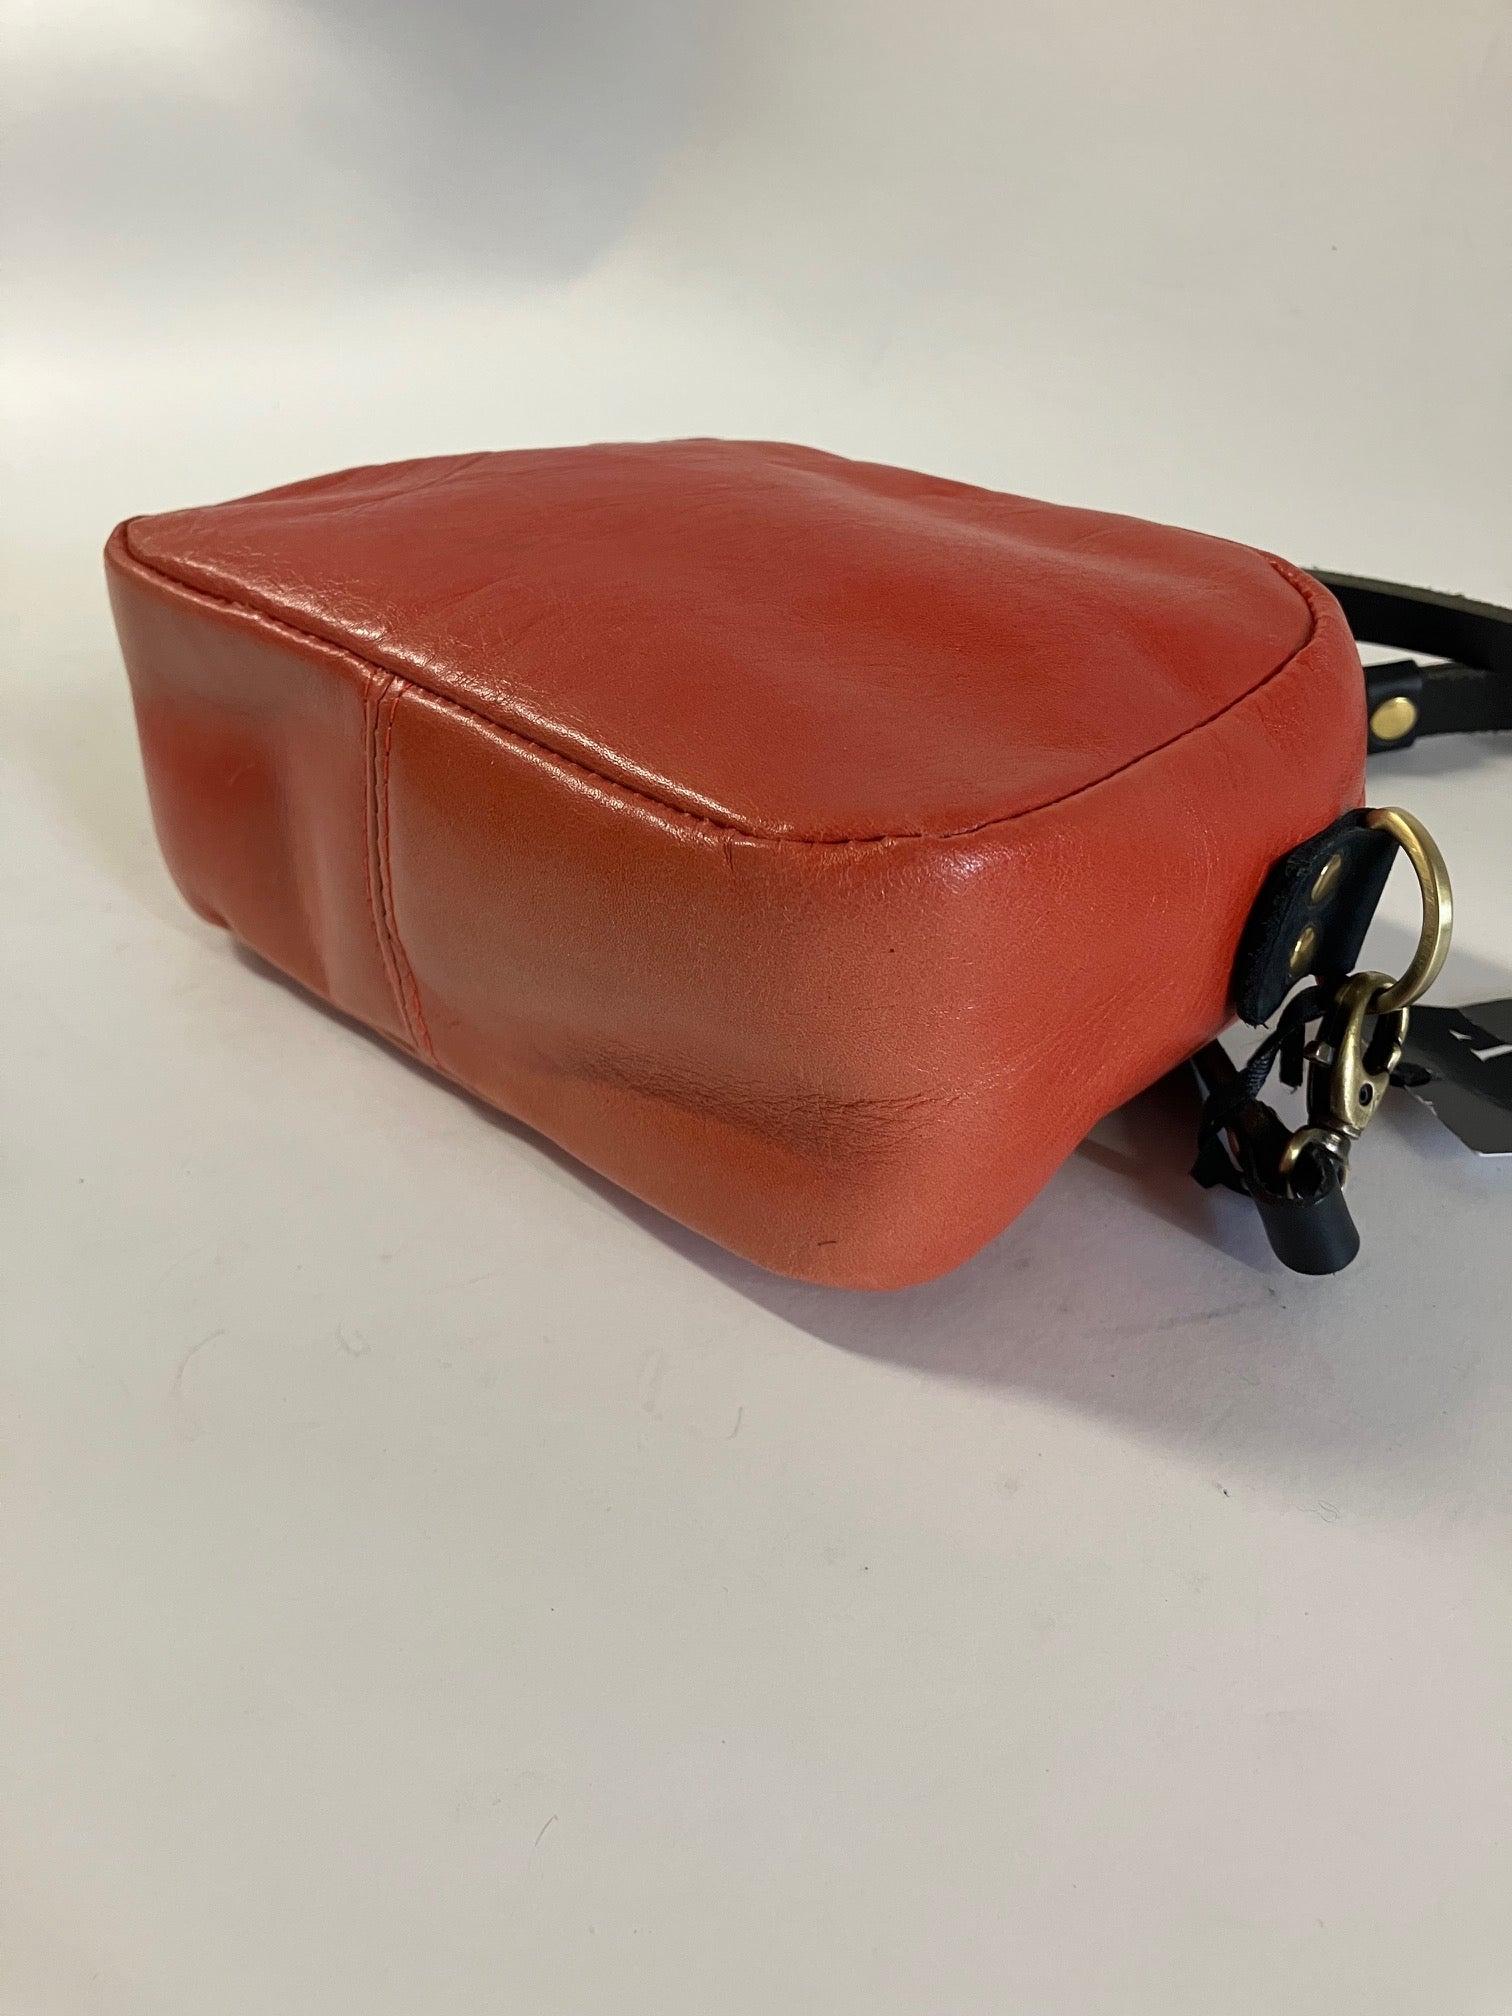 SAMPLE Leather crossbody bag and brass charm red color